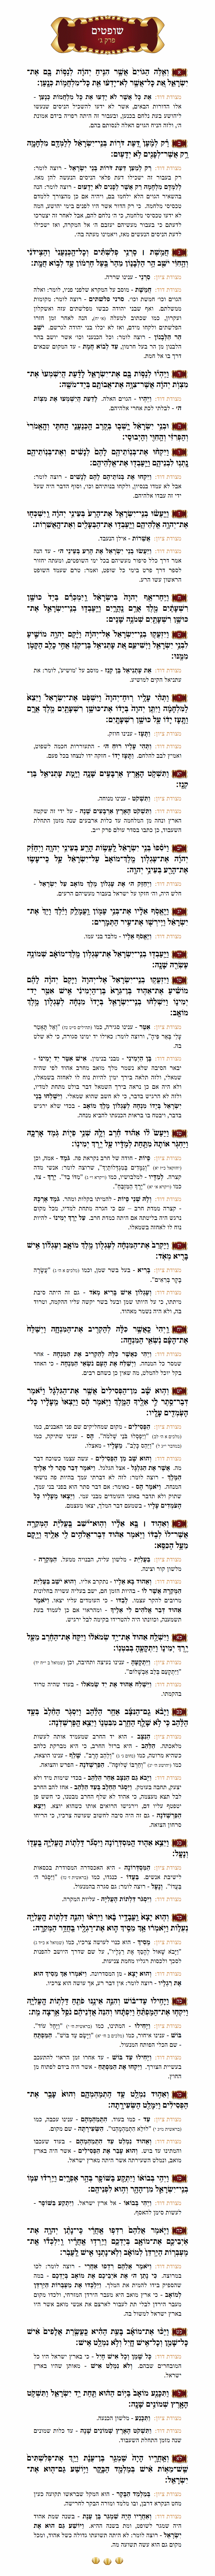 Sefer Shoftim Chapter 3 with commentary